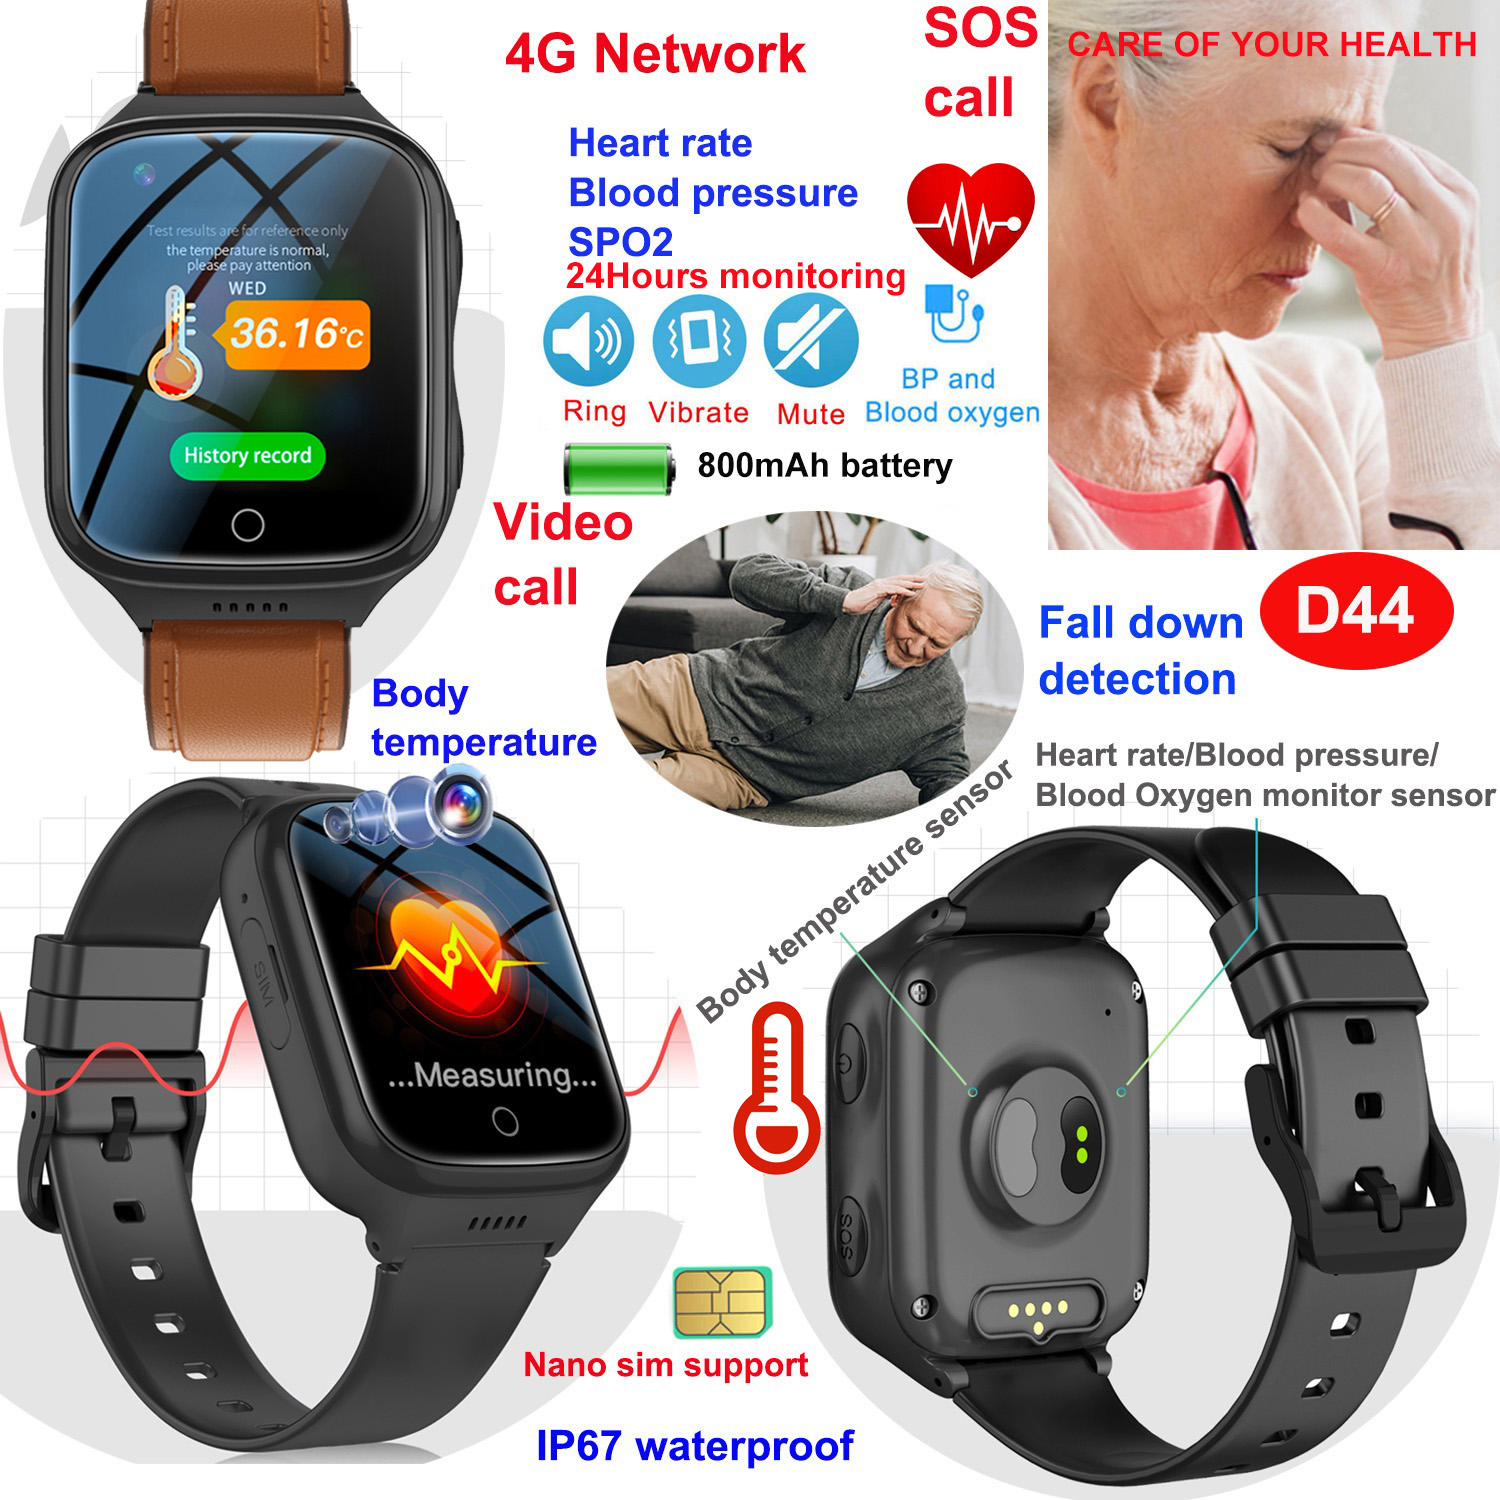 LTE Waterproof Senior GPS Tracker Watch with Fall Down Thermometer D44